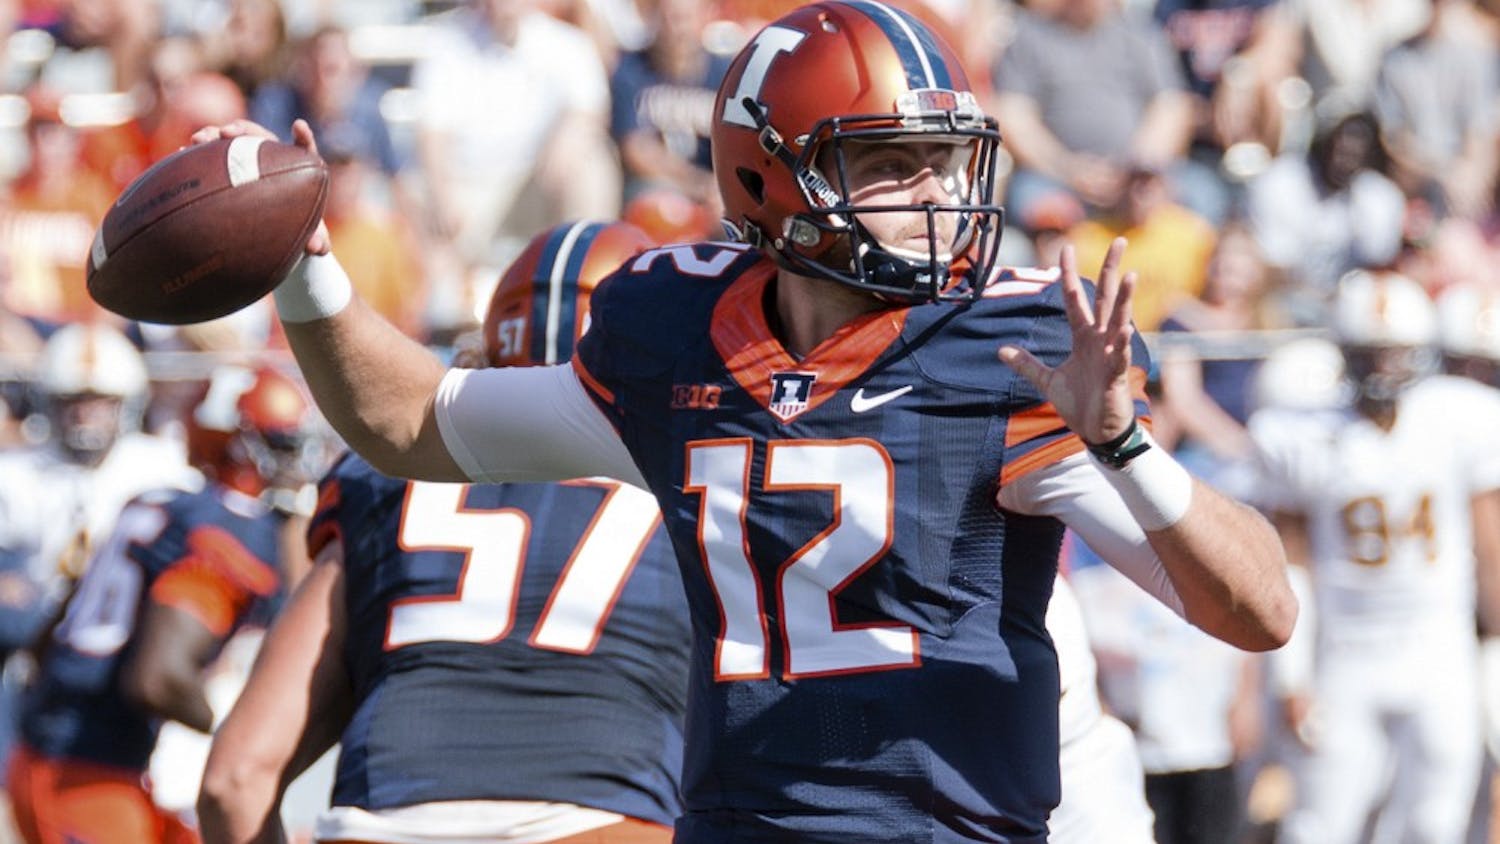 Illinois quarterback Wes Lunt (12) looks to pass the ball during the game against Murray State at Memorial Stadium on Saturday, September 3. The Illini won 52-3.